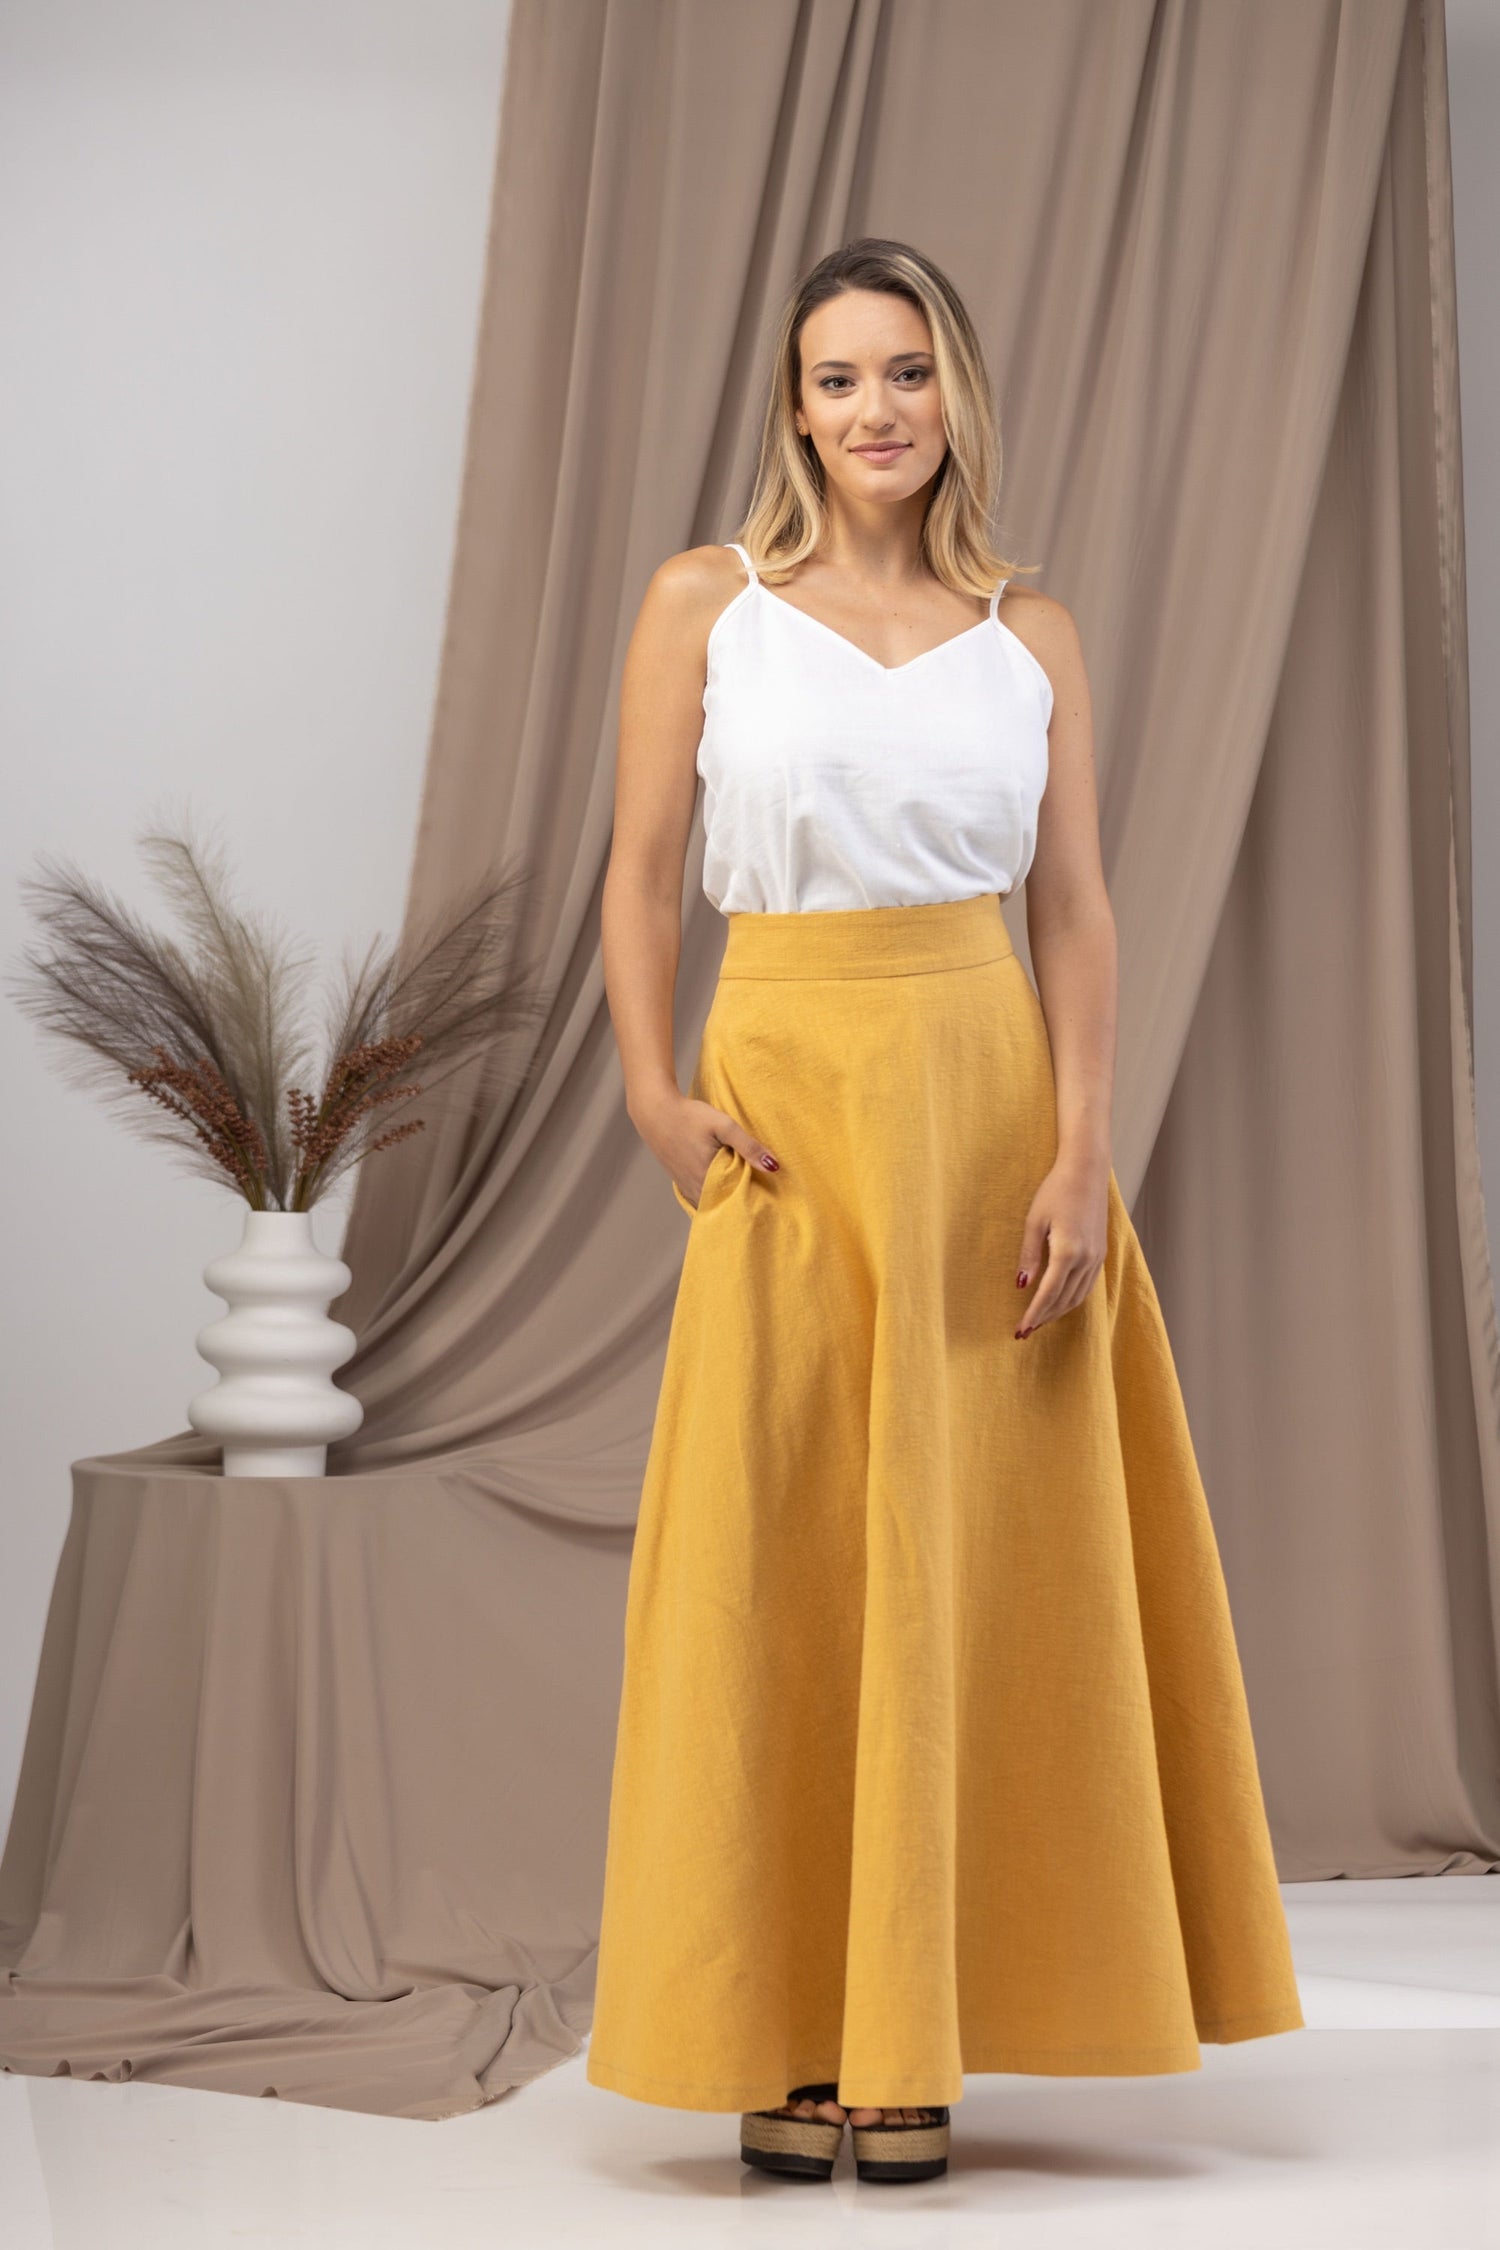 Soft and Breathable Linen Skirt for Summer - from Nikka Place | Effortless fashion for easy living